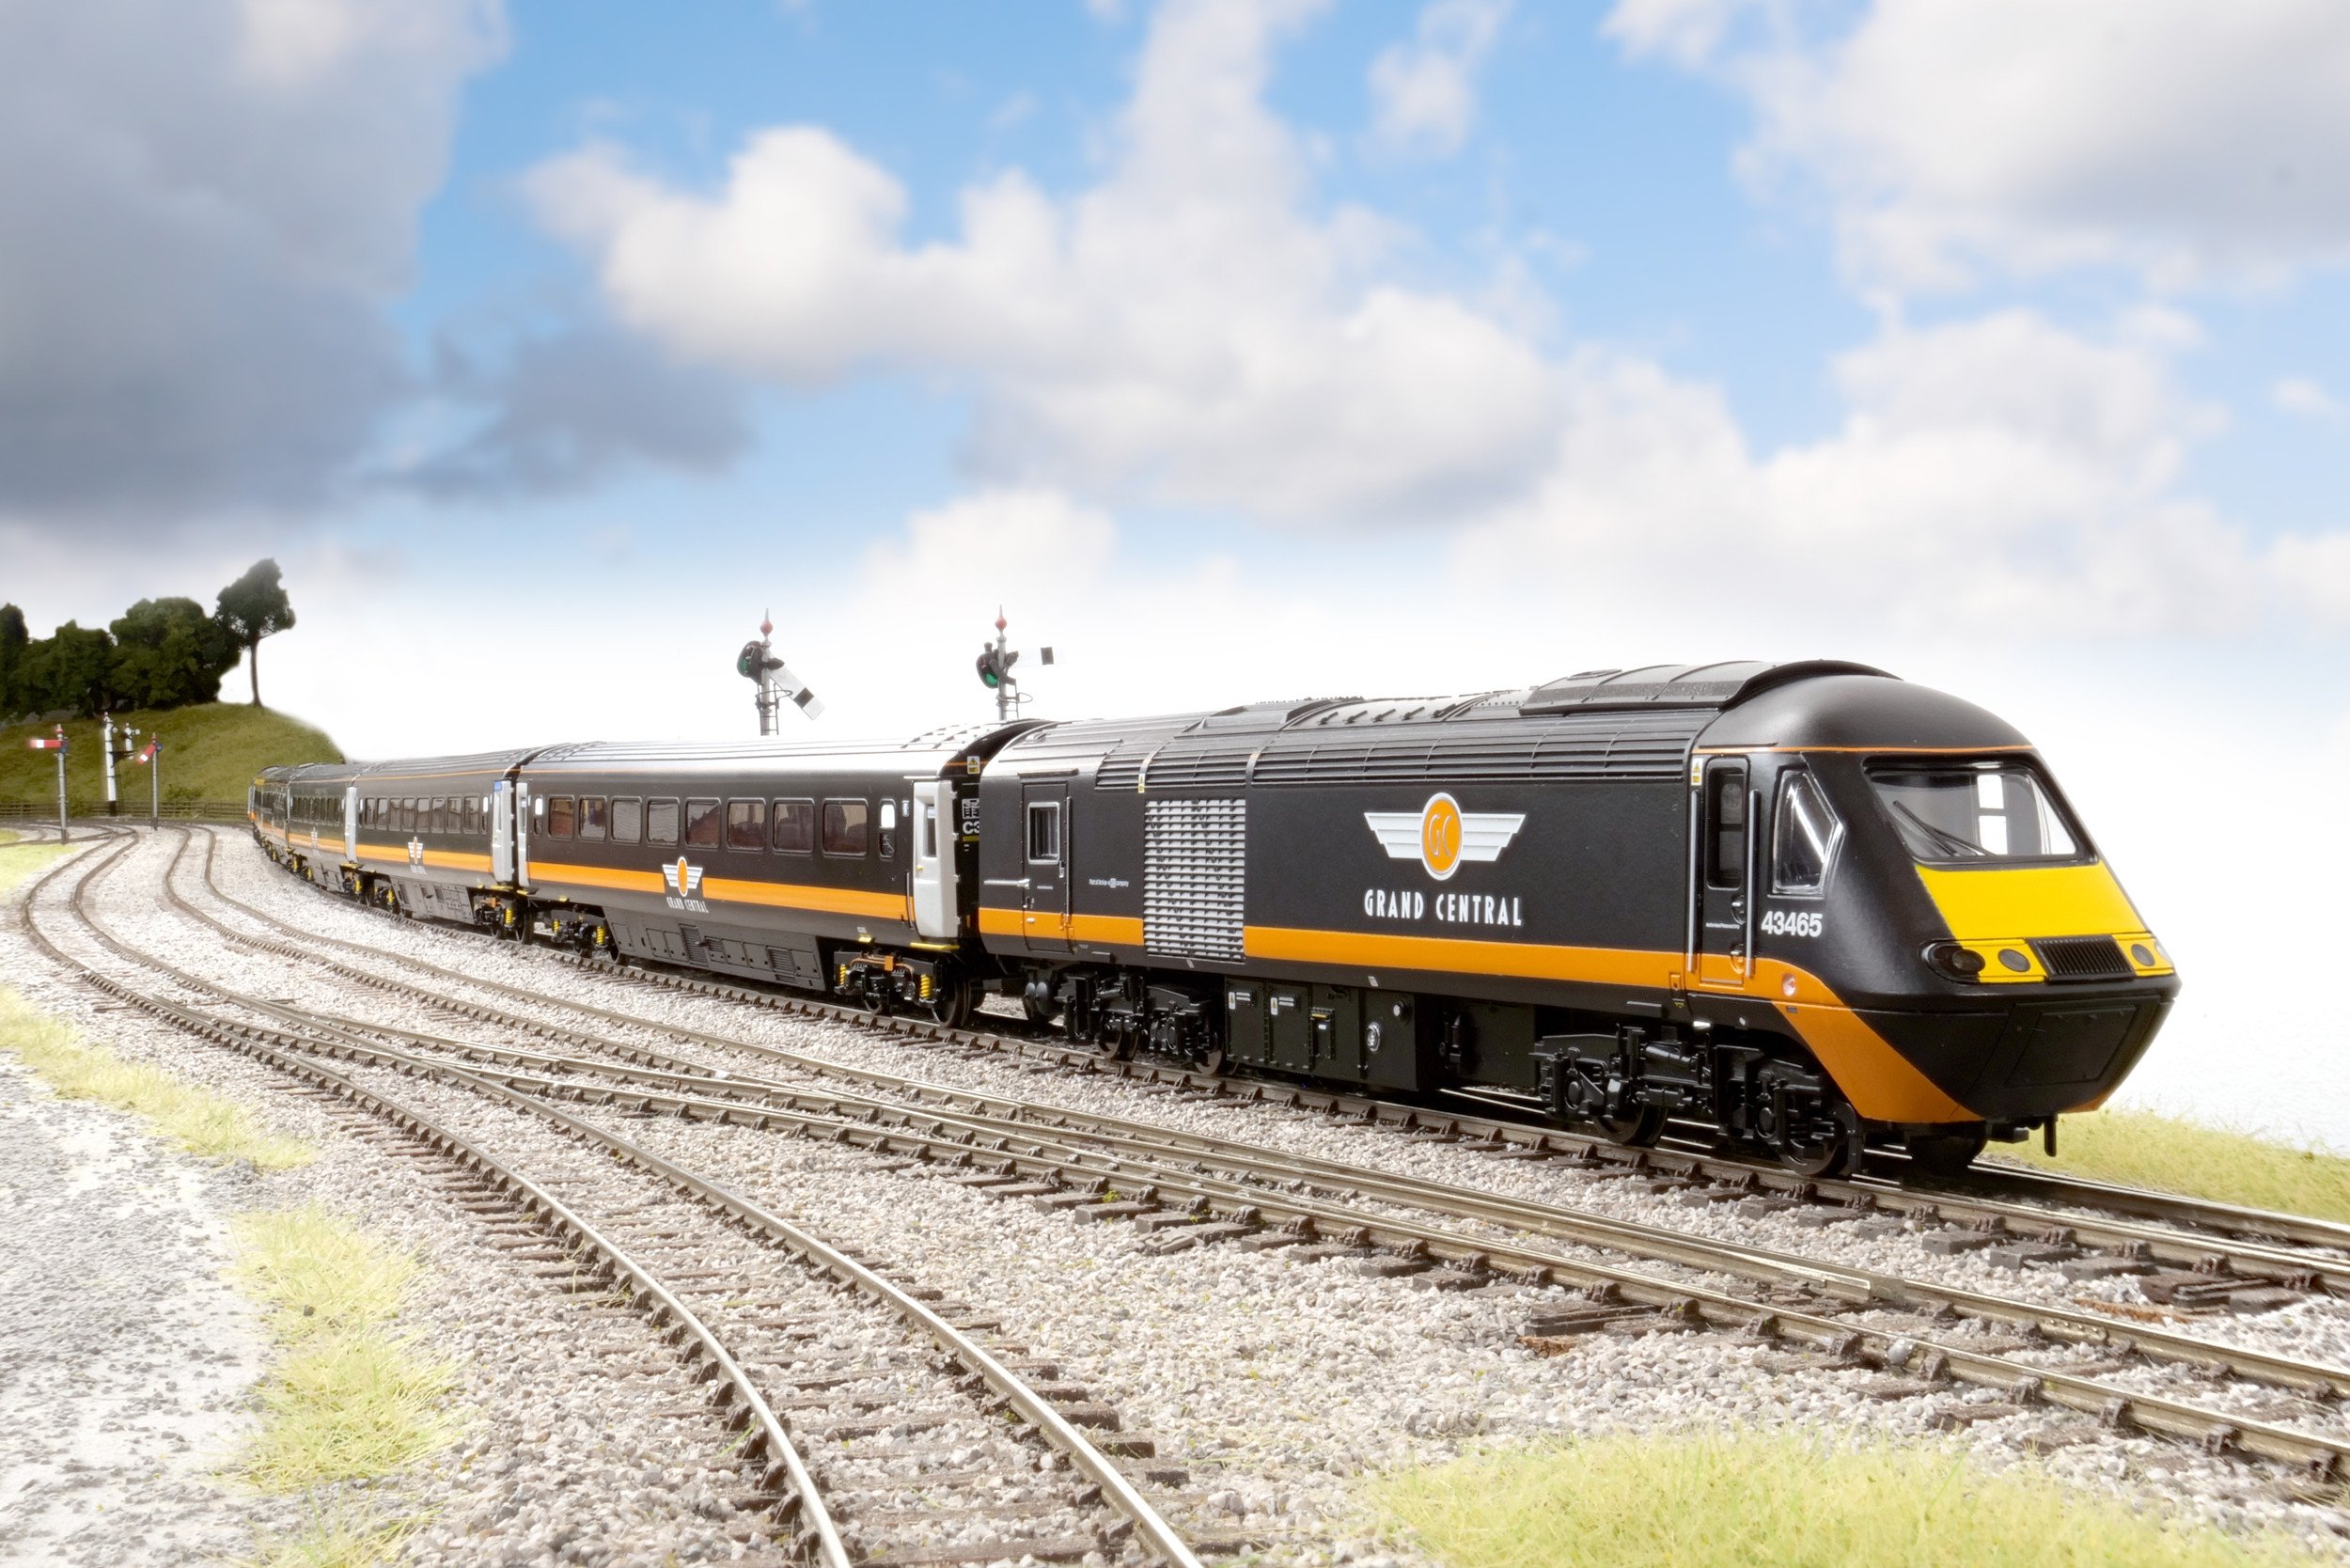 A Grand Central HST joins the companies RailRoad Plus Range.